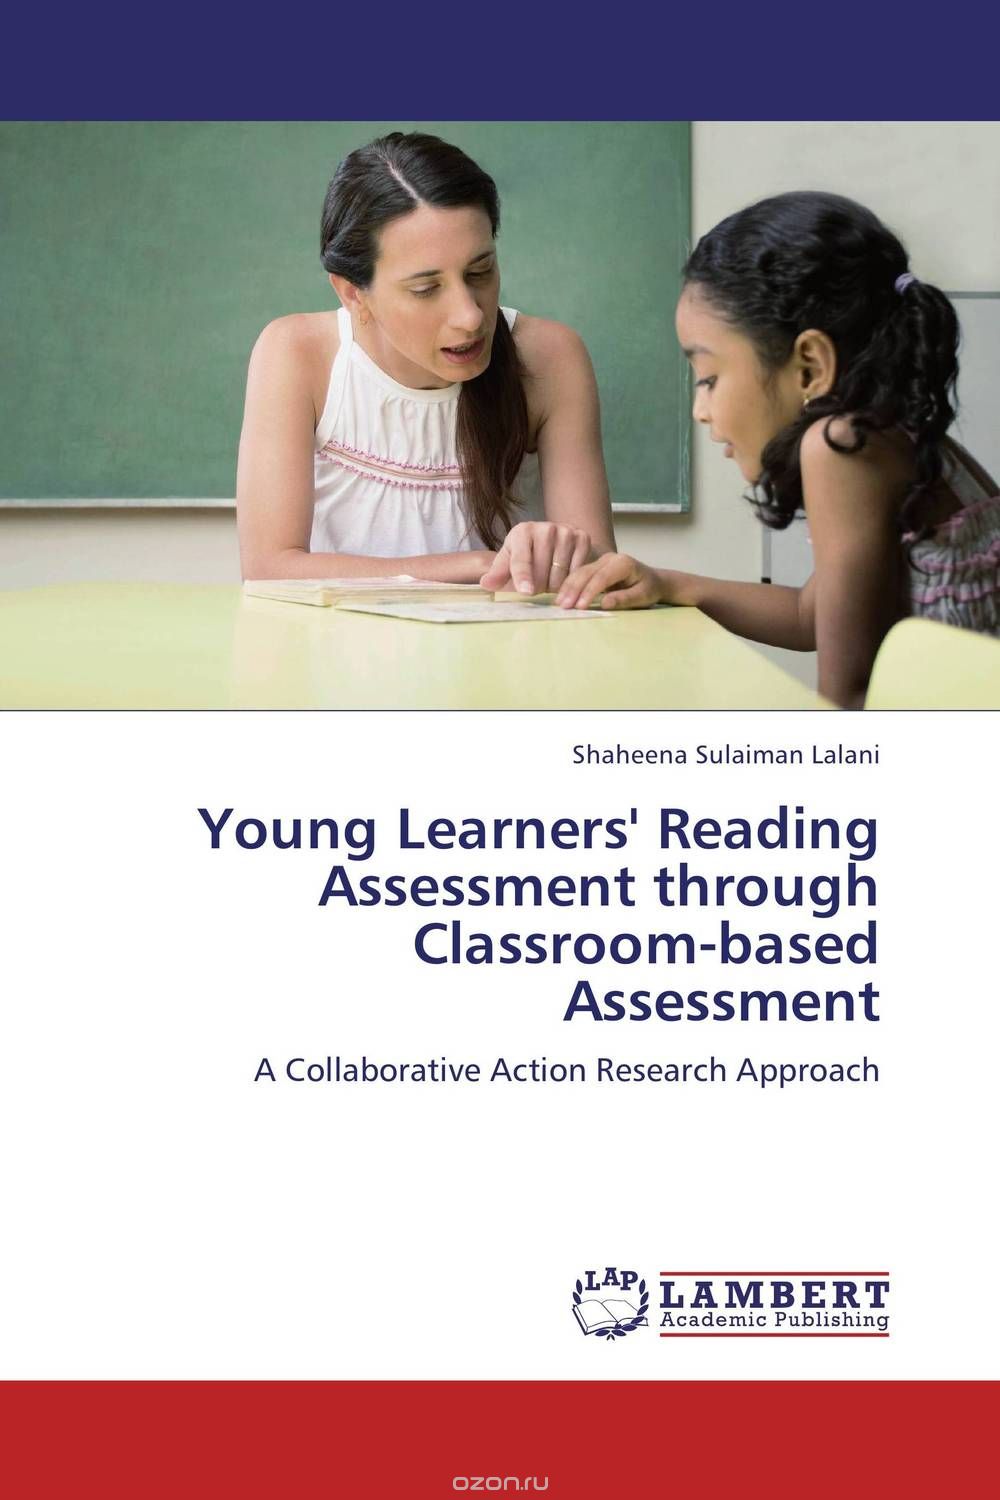 Young Learners' Reading Assessment through Classroom-based Assessment